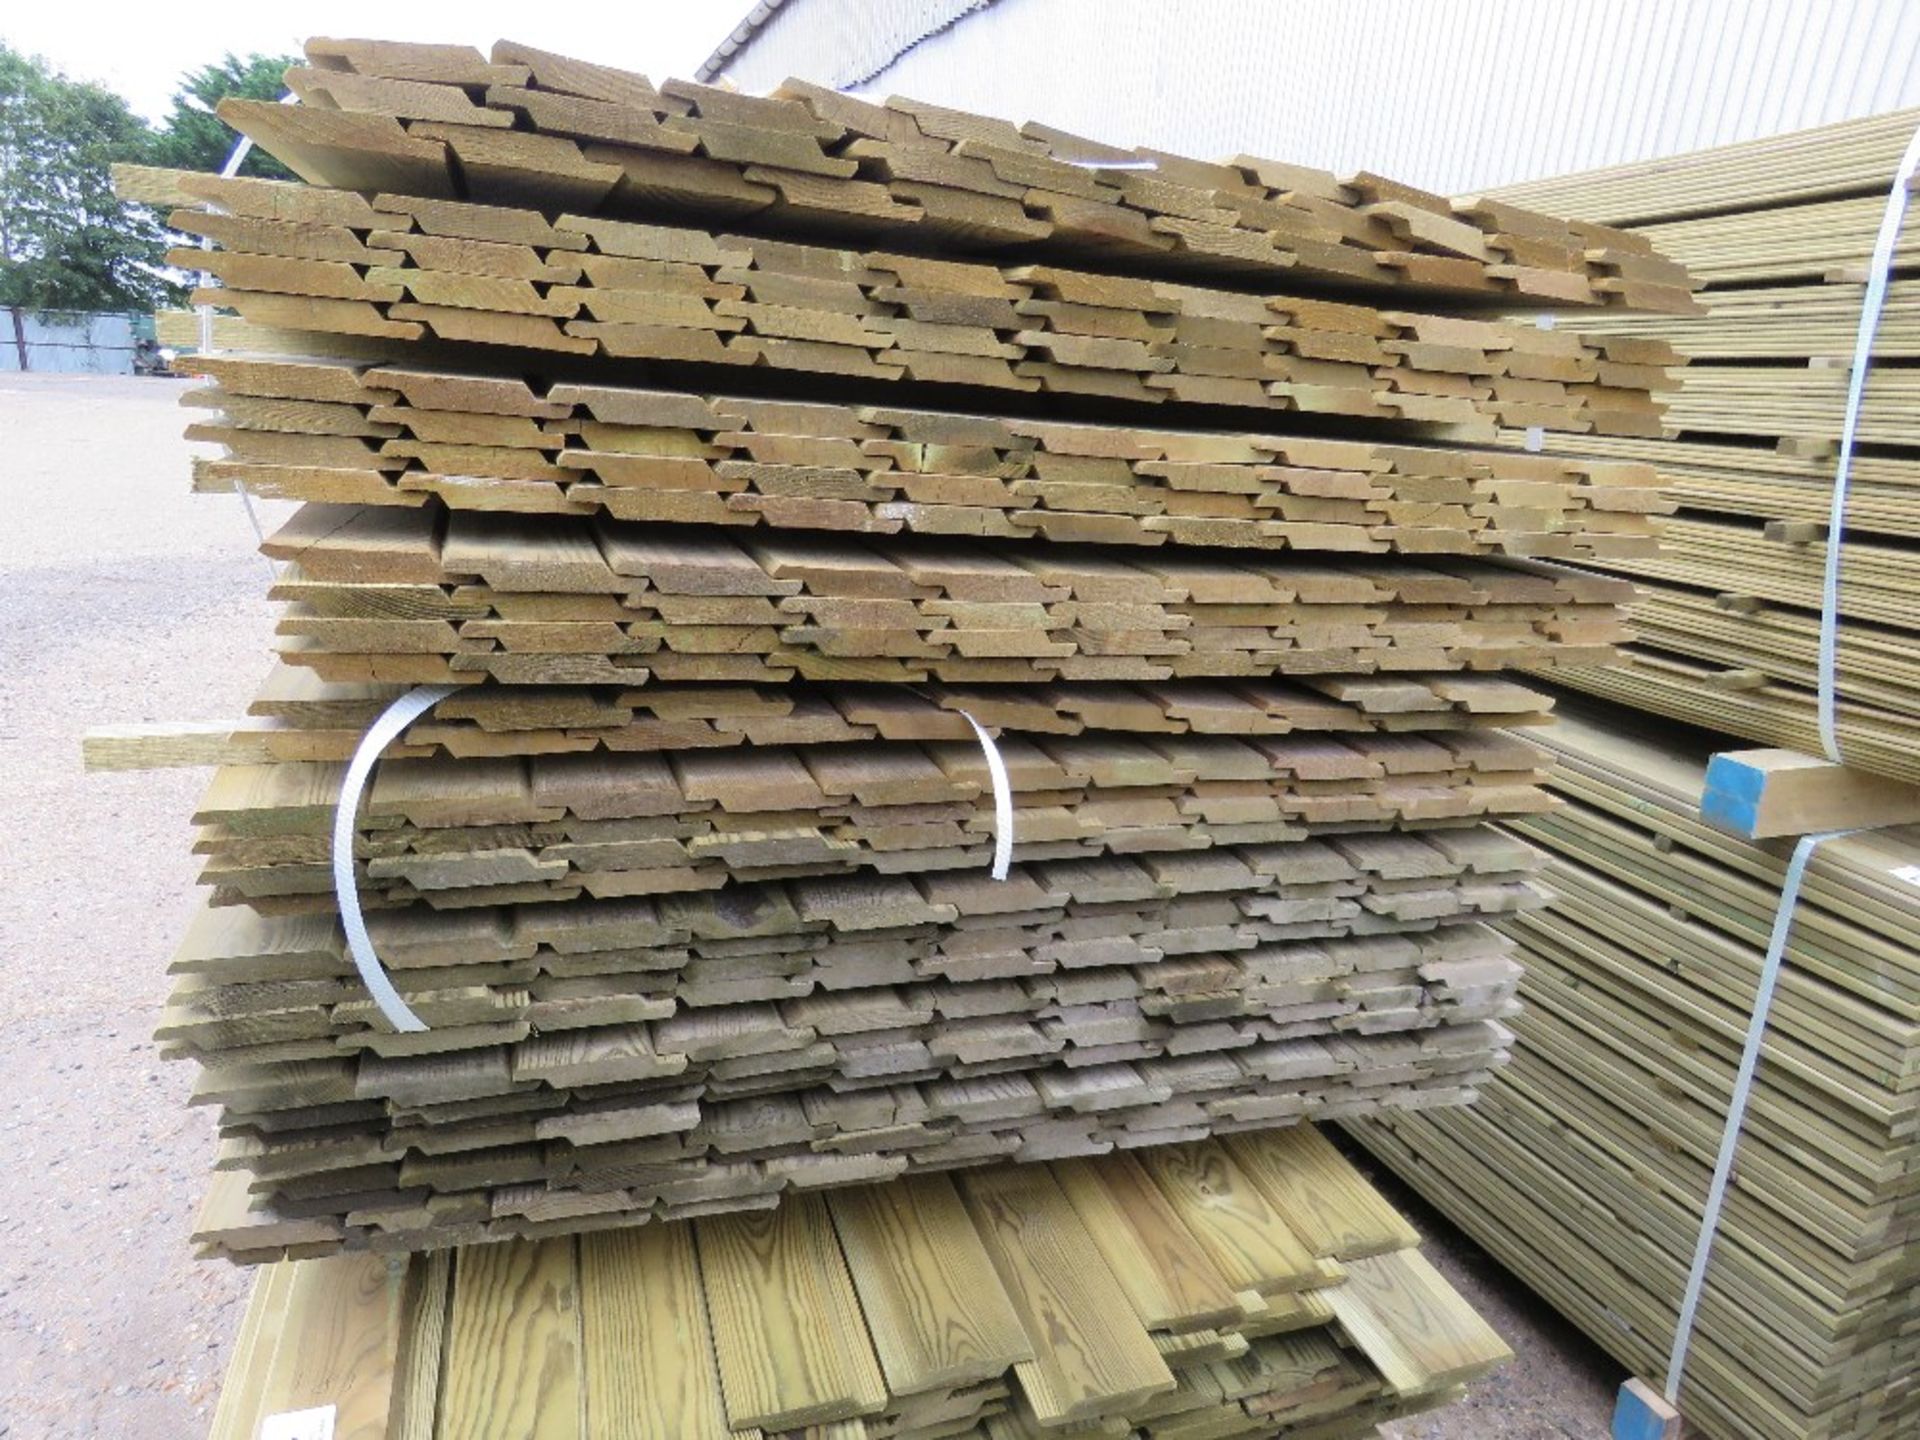 LARGE PACK OF TREATED SHIPLAP TIMBER CLADDING BOARDS, 1.83M LENGTH X 9.5CM WIDTH APPROX. - Image 2 of 4